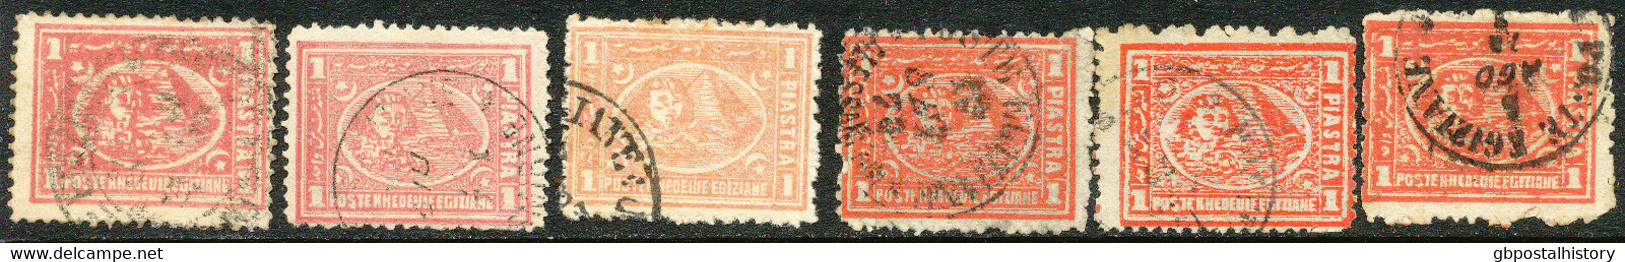 EGYPT 1872 Sphinx Before Cheopspyramide 1 Pia From Pink (3) To Brickred (11) VFU - 1866-1914 Khedivate Of Egypt